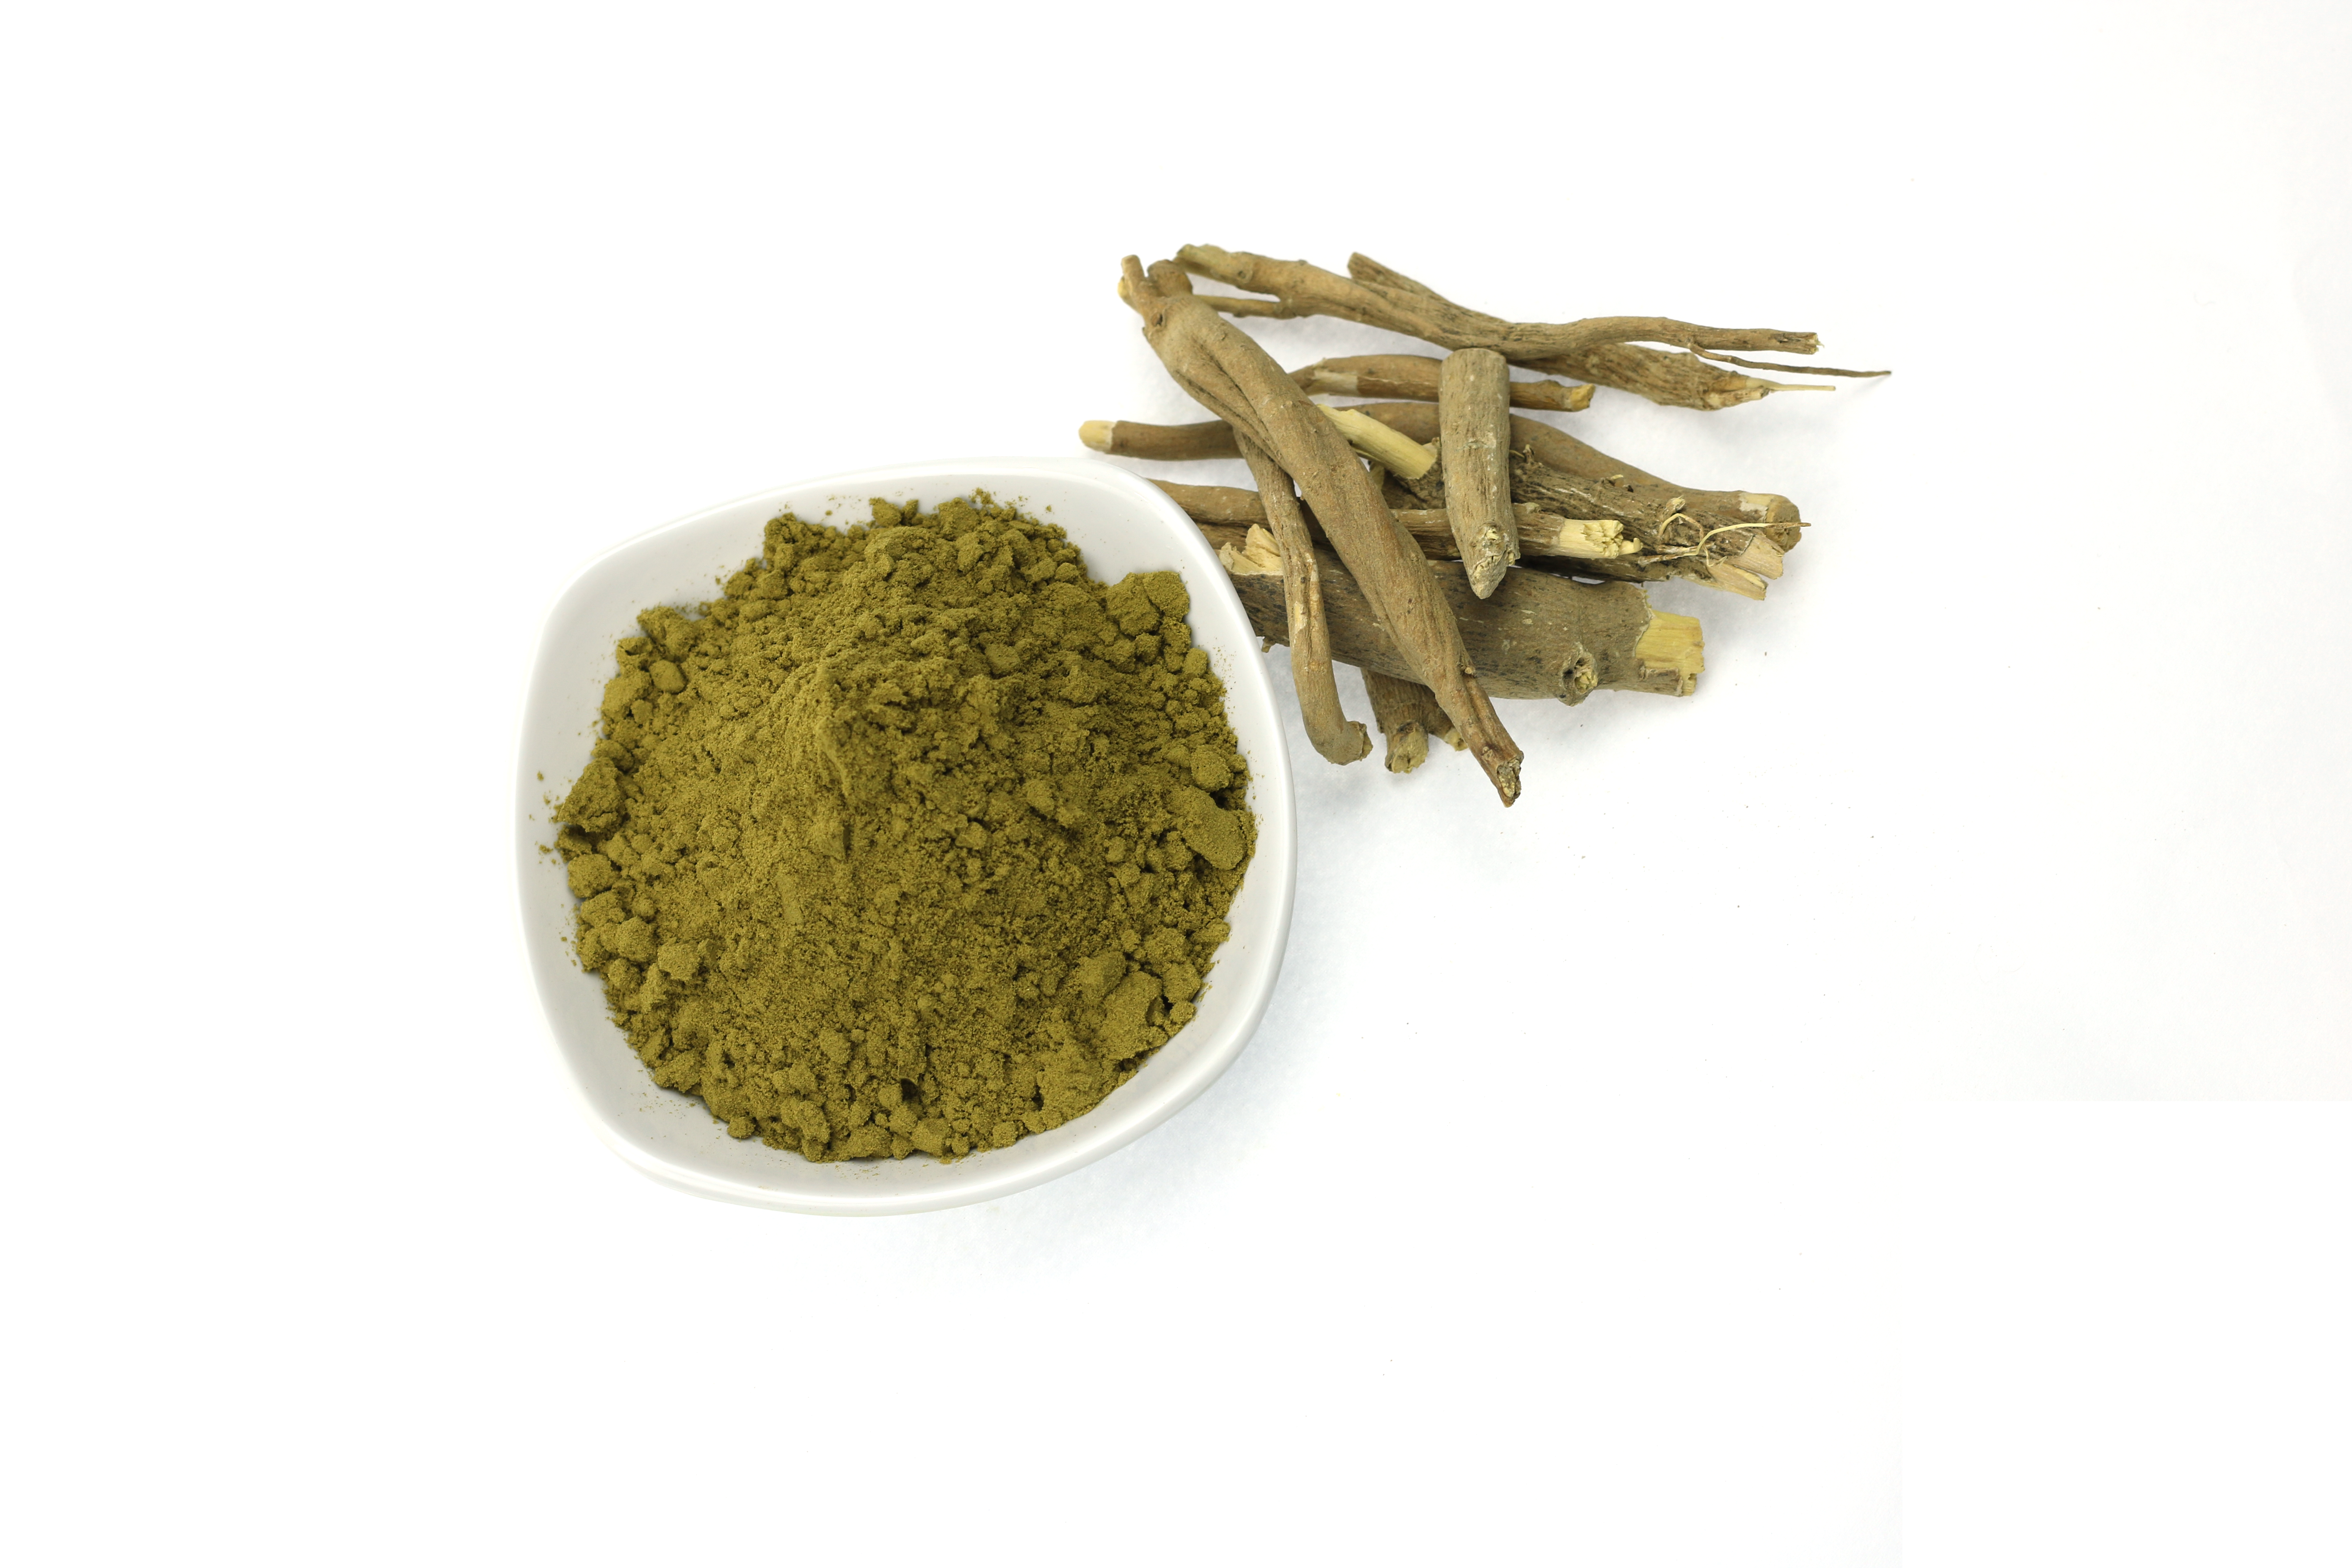 What is the best time to take Ashwagandha